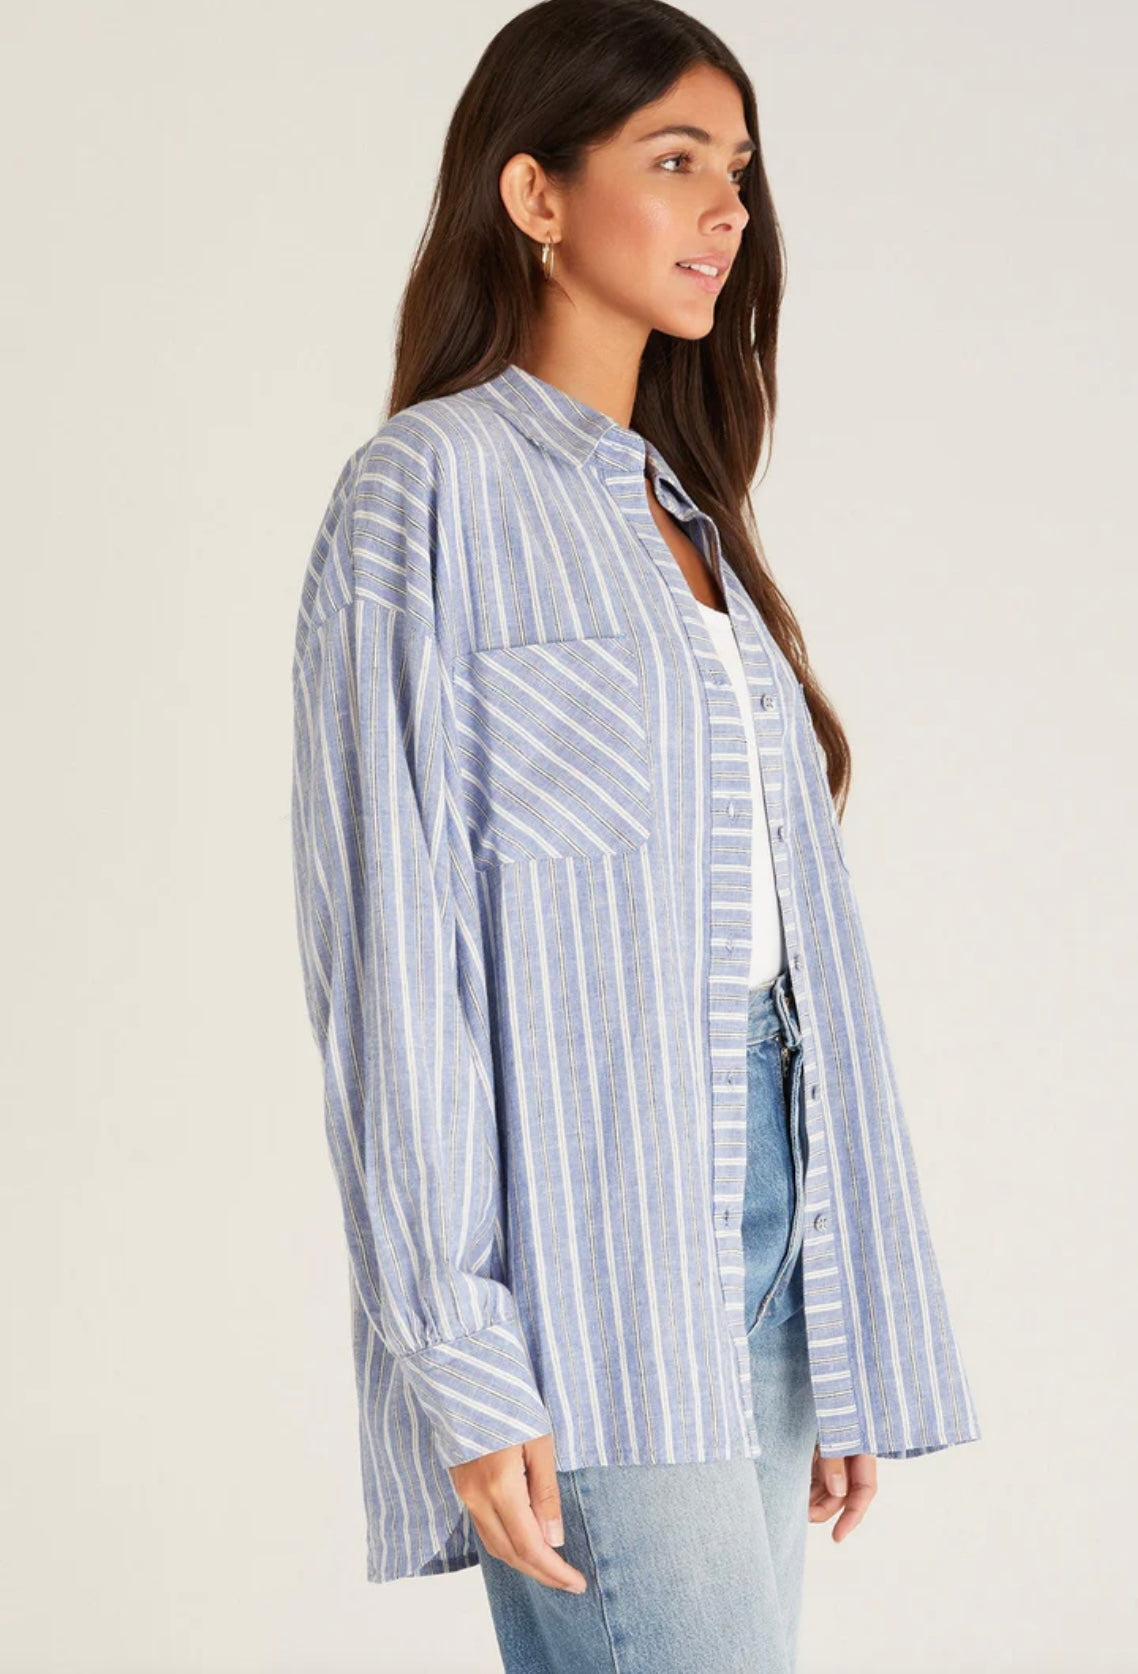 Z Supply NATALIA STRIPED BUTTON UP TOP